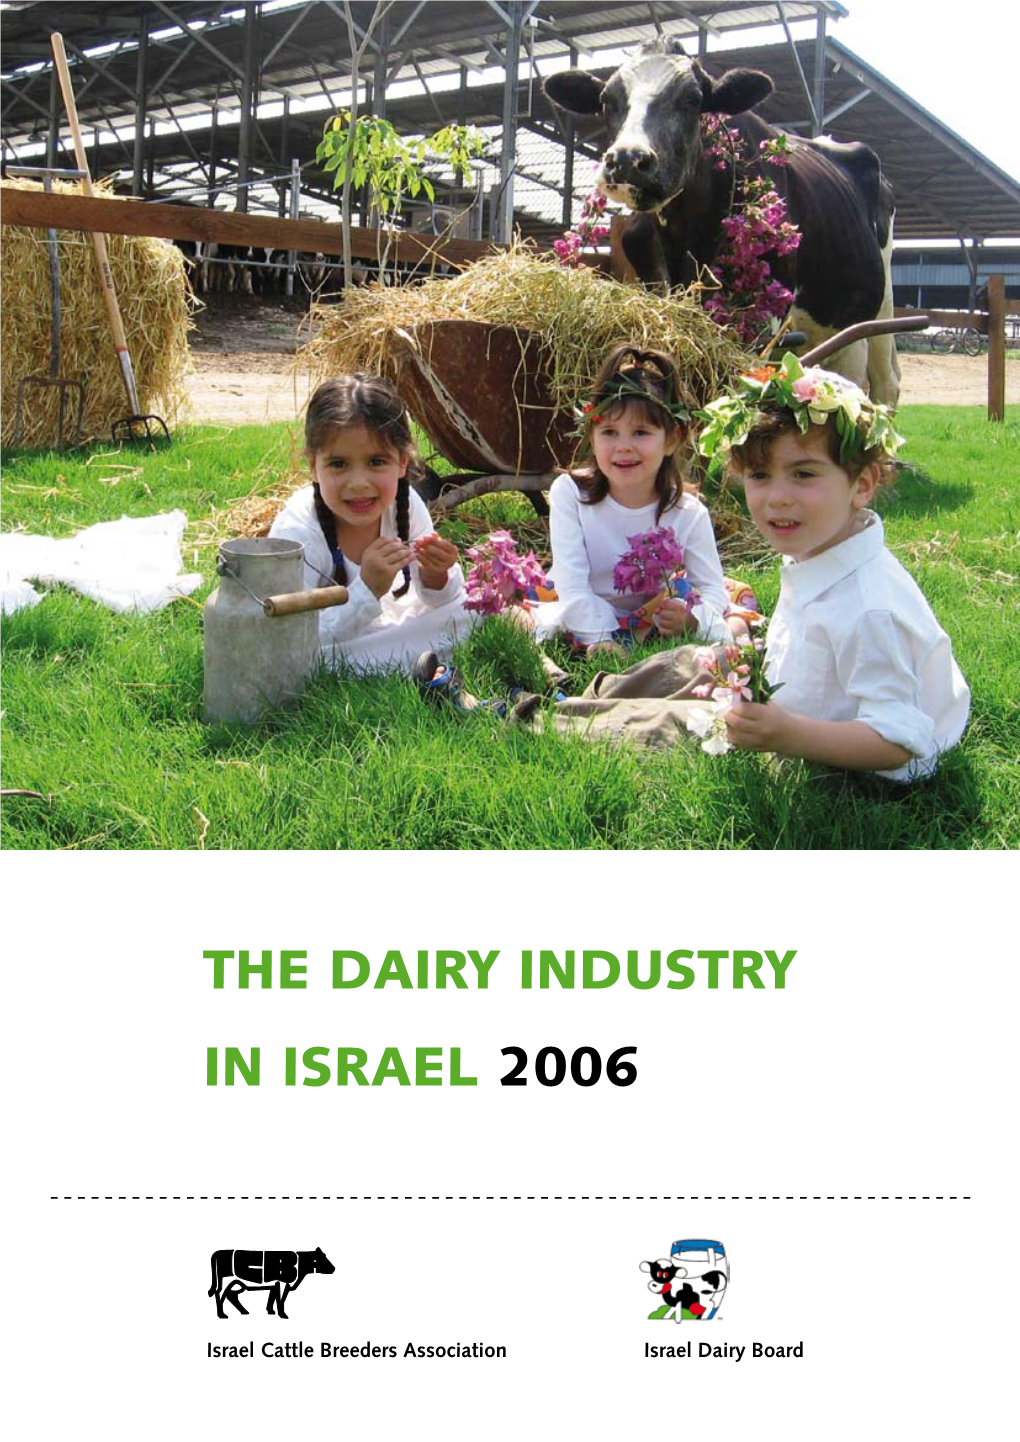 The Dairy Industry in Israel 2006